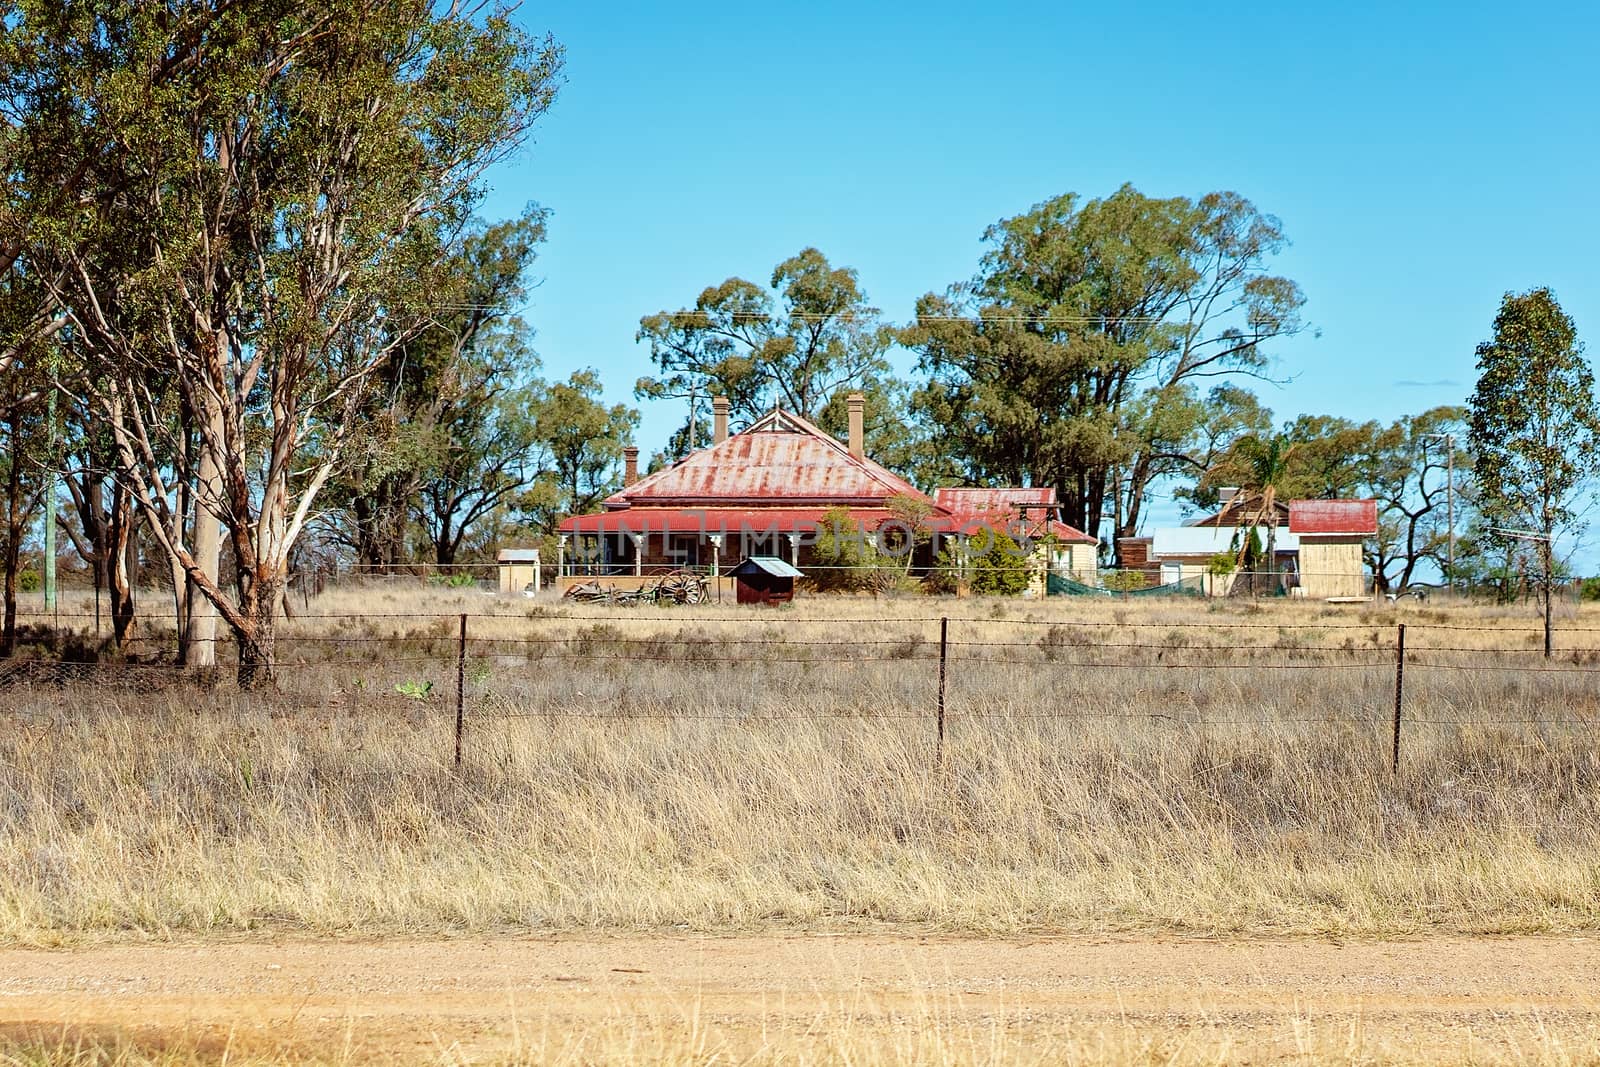 Iconic Old Australian Country Homestead by 	JacksonStock